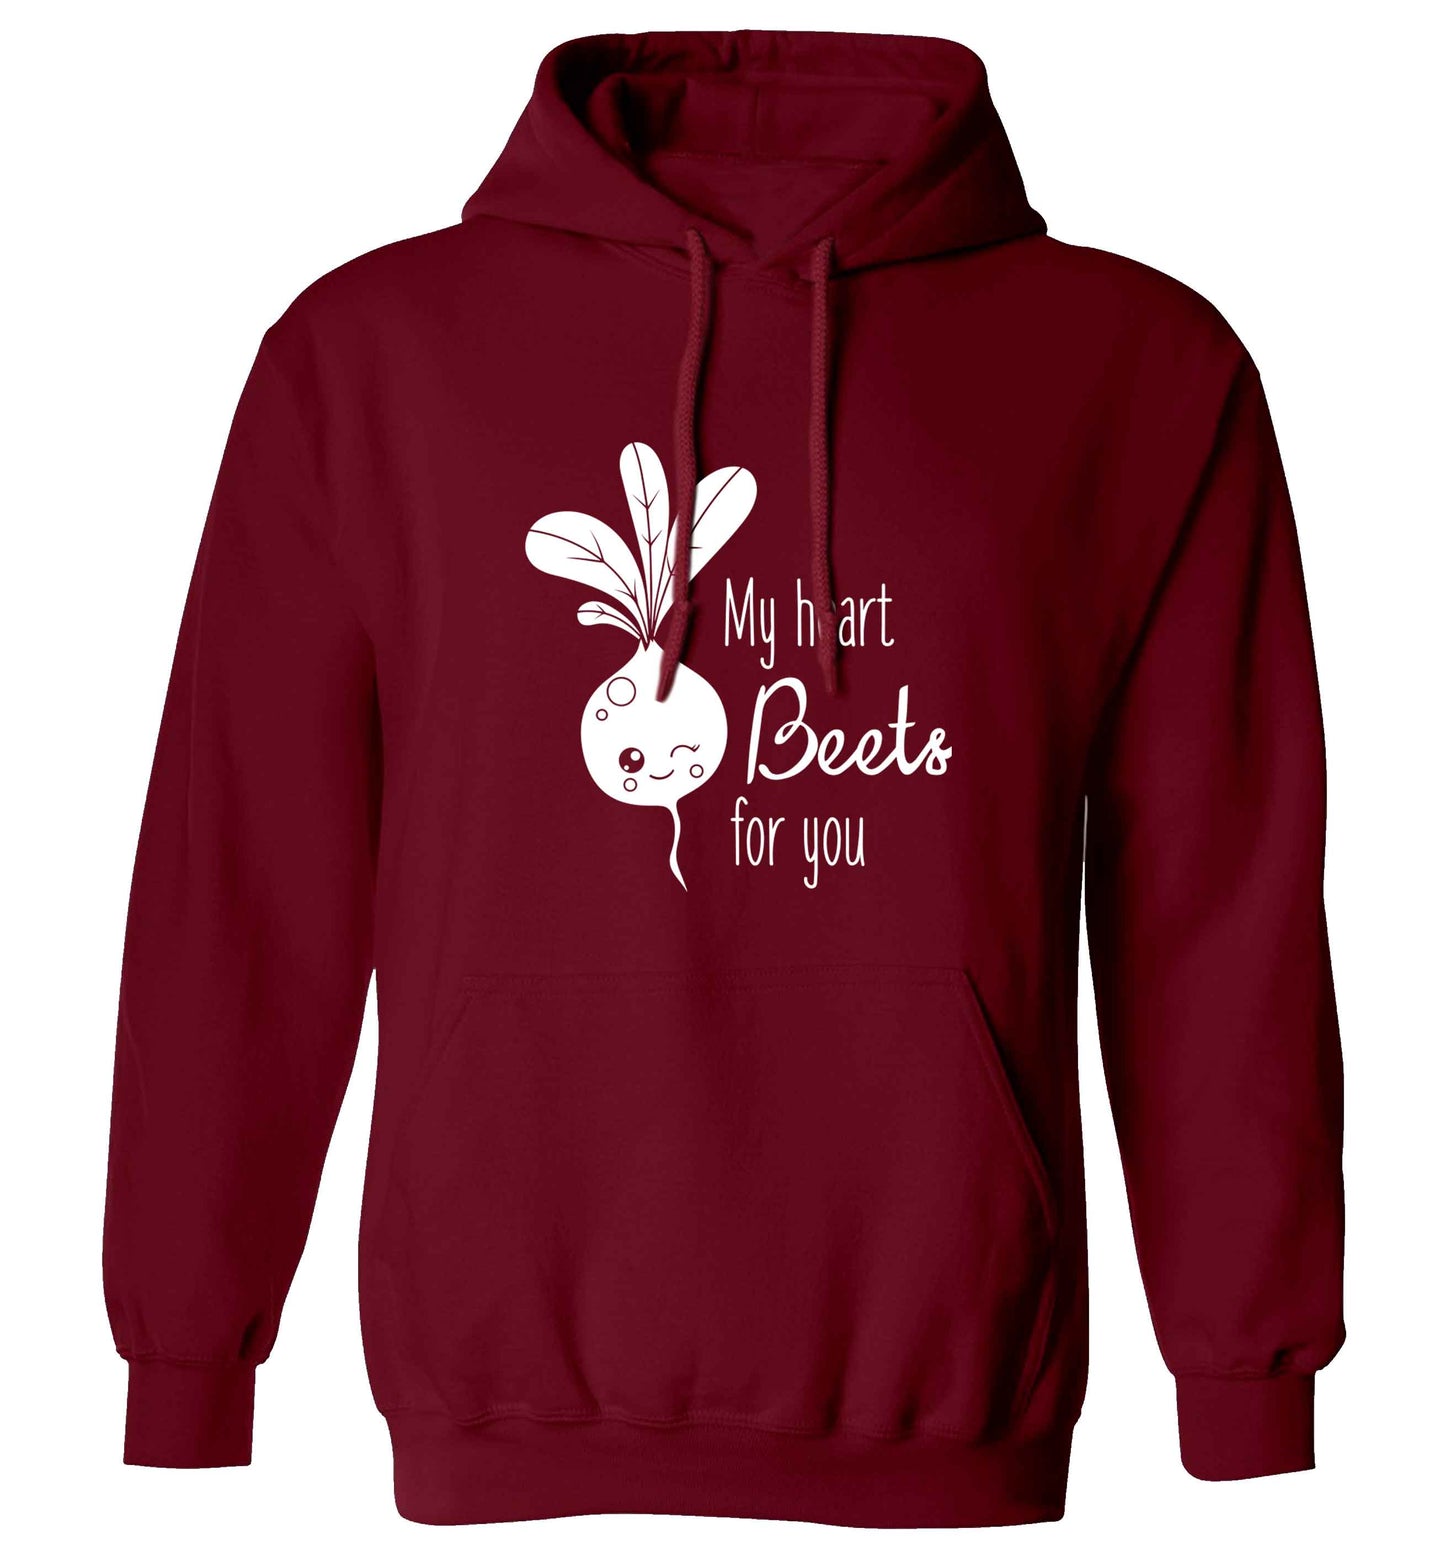 My heart beets for you adults unisex maroon hoodie 2XL